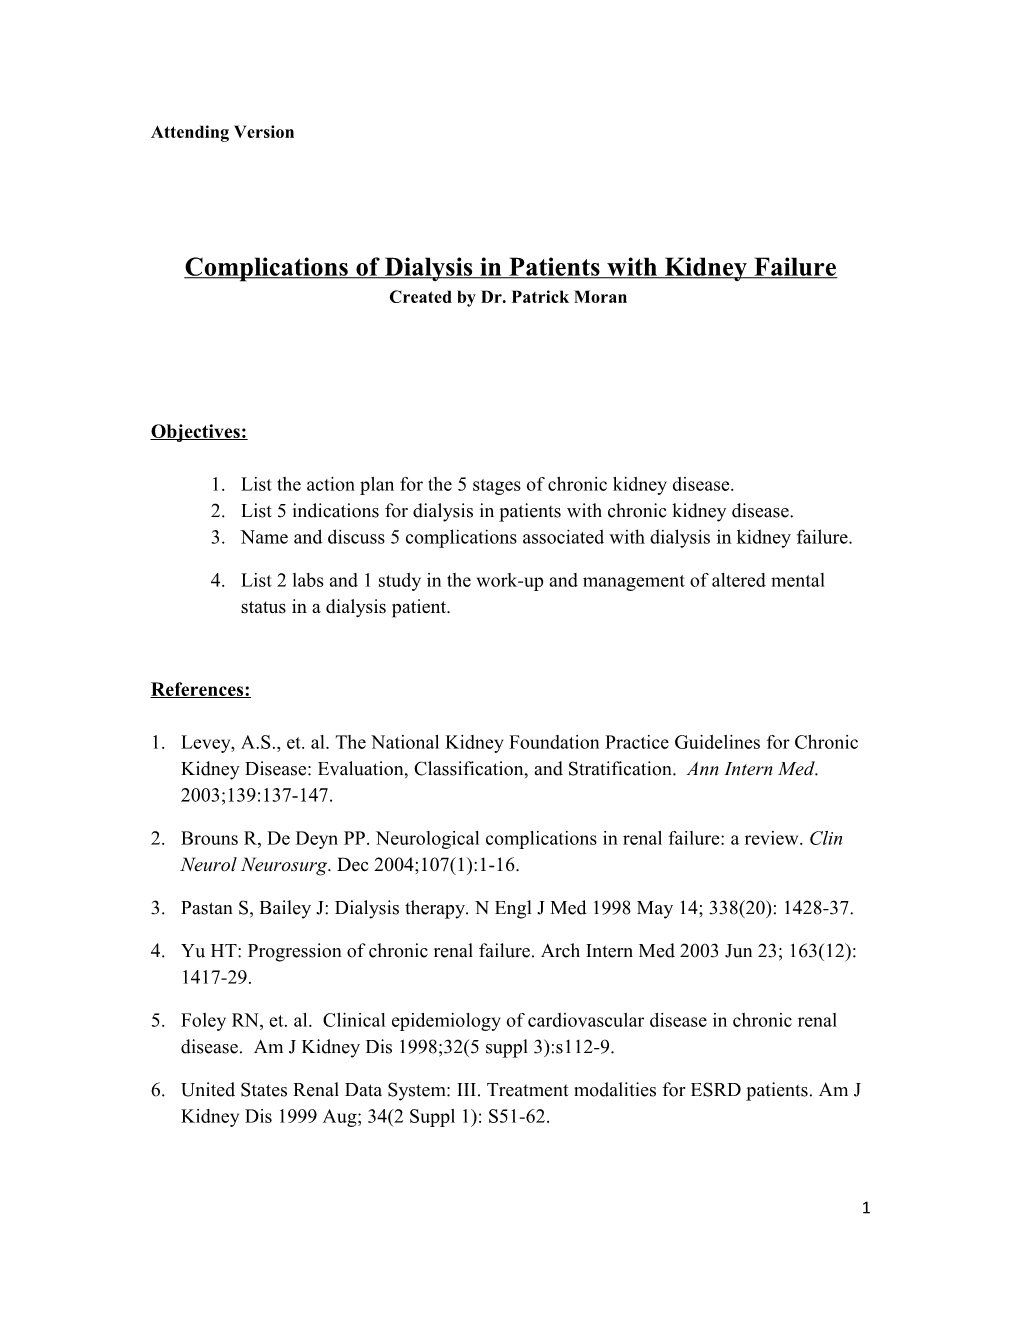 Attending Version: Complications of Dialysis in Patients with Kidney Failure